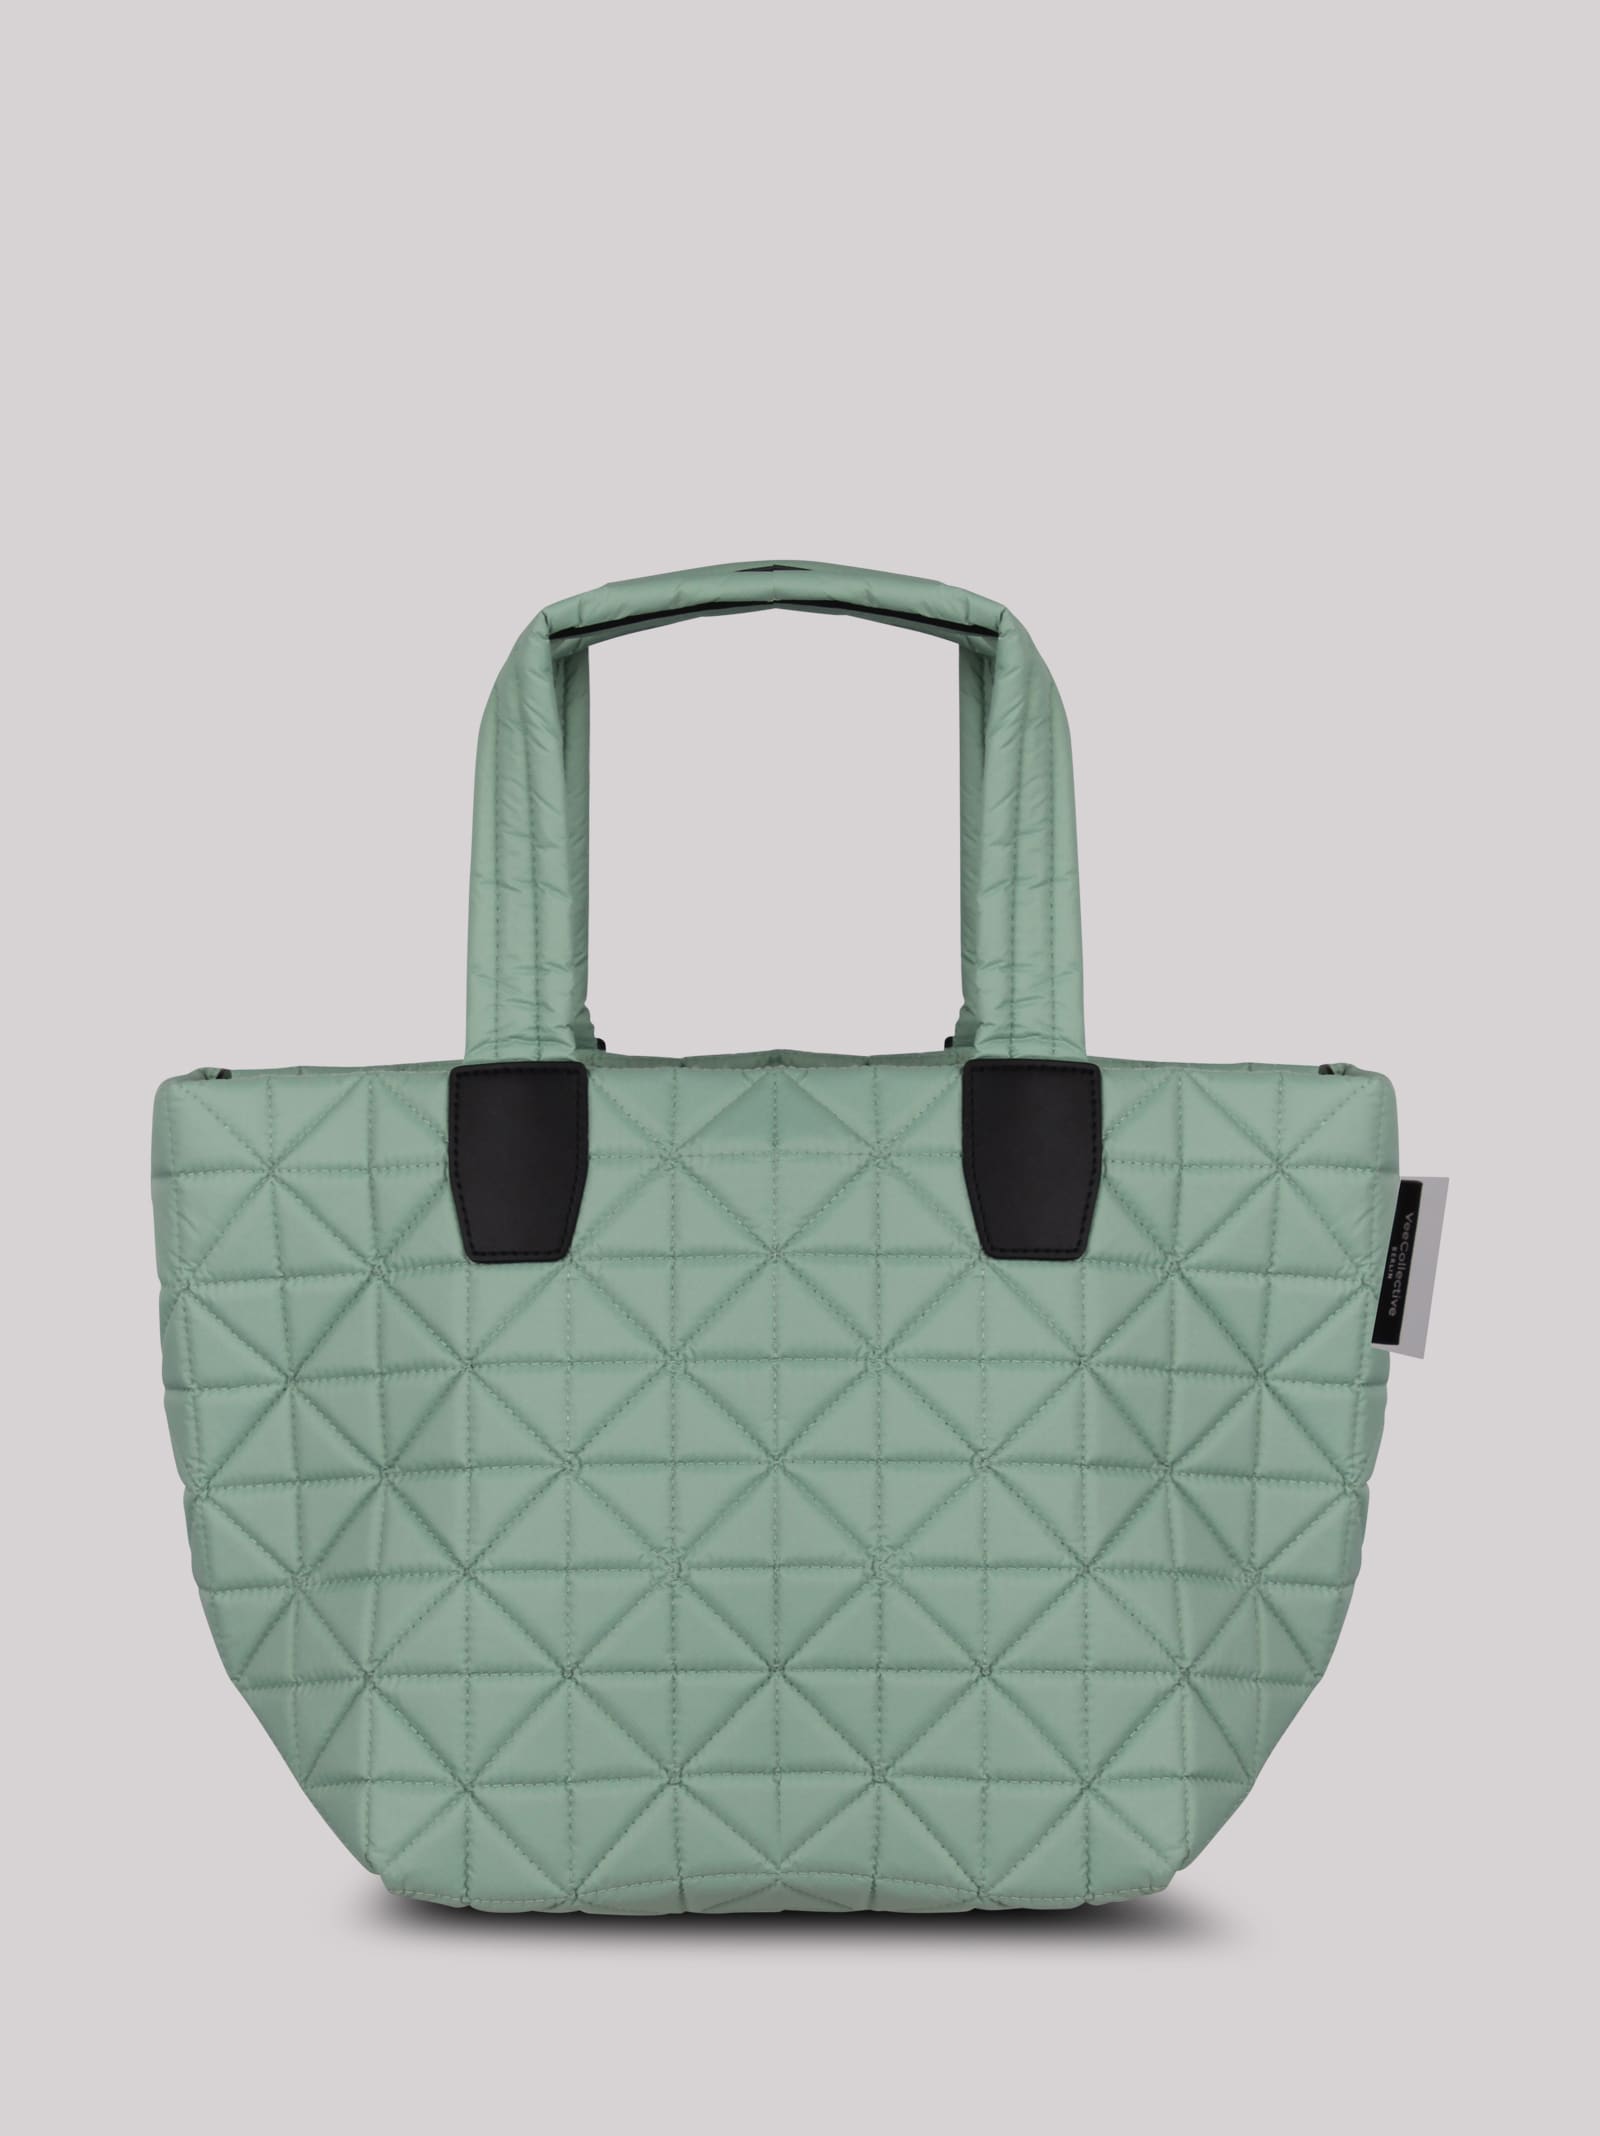 Shop Veecollective Vee Collective Padded Tote Bag